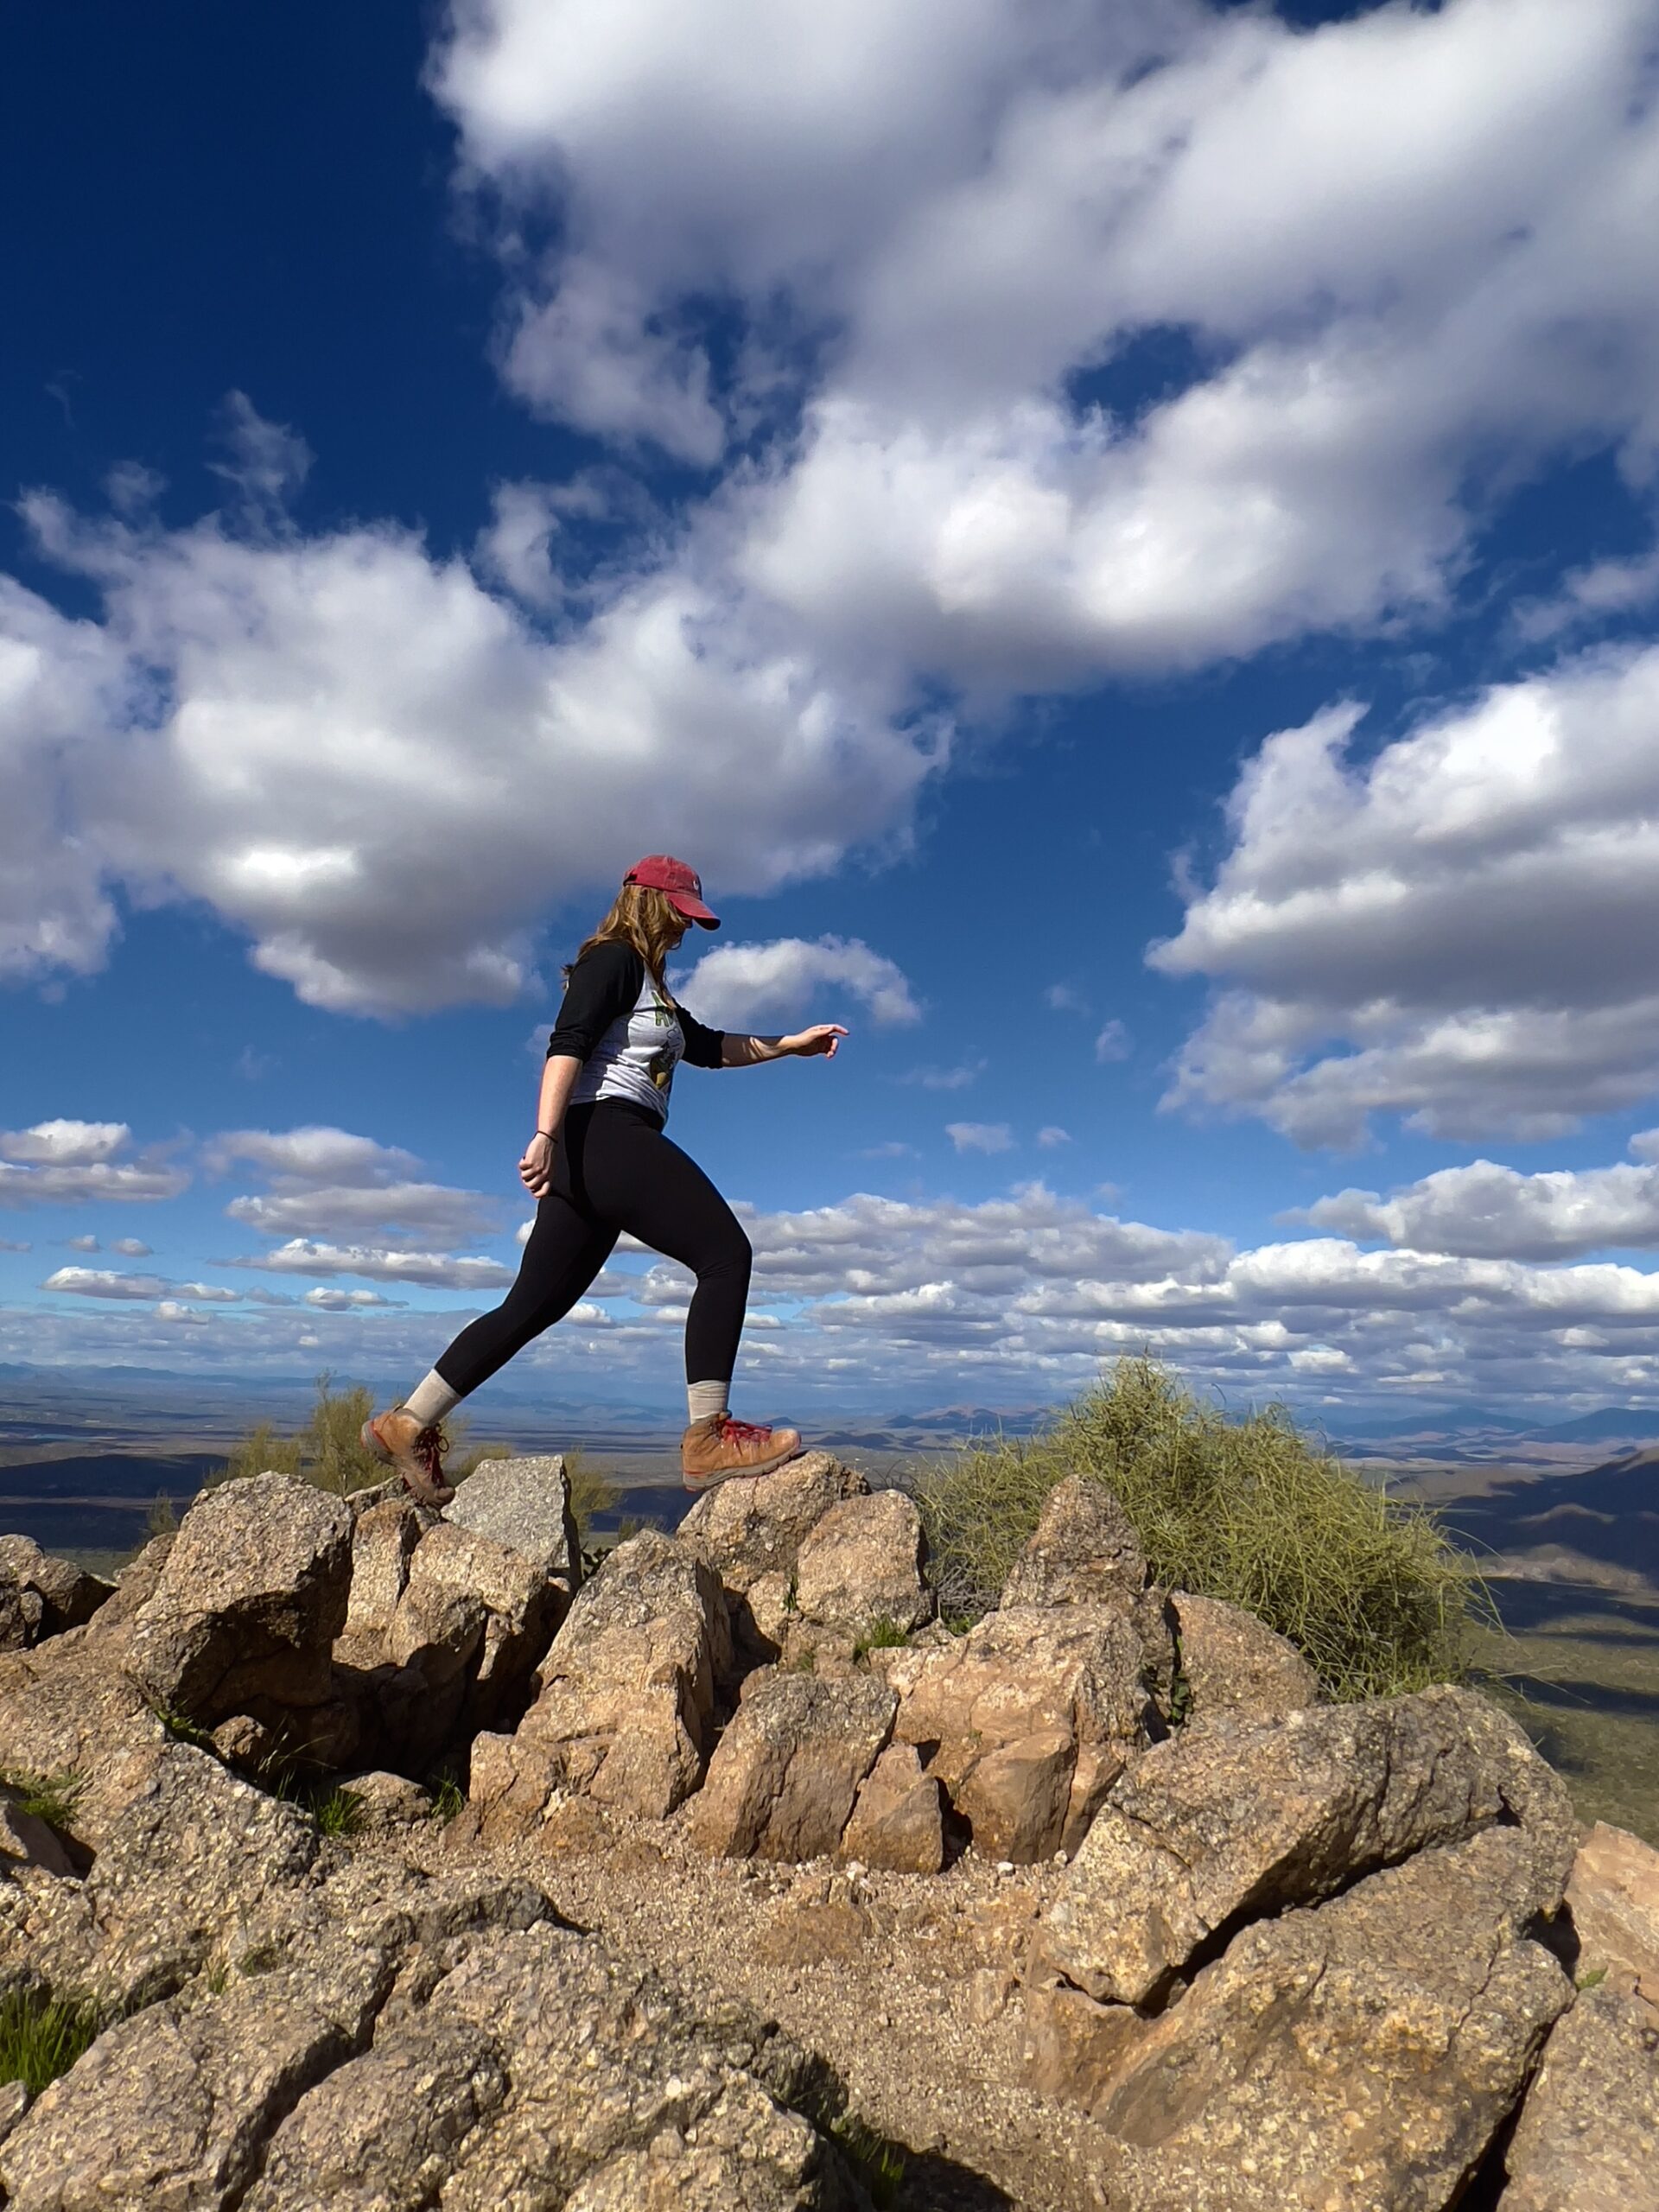 Girl Stepping up on Rocks on a Mountain Summit in the Middle of the Day.